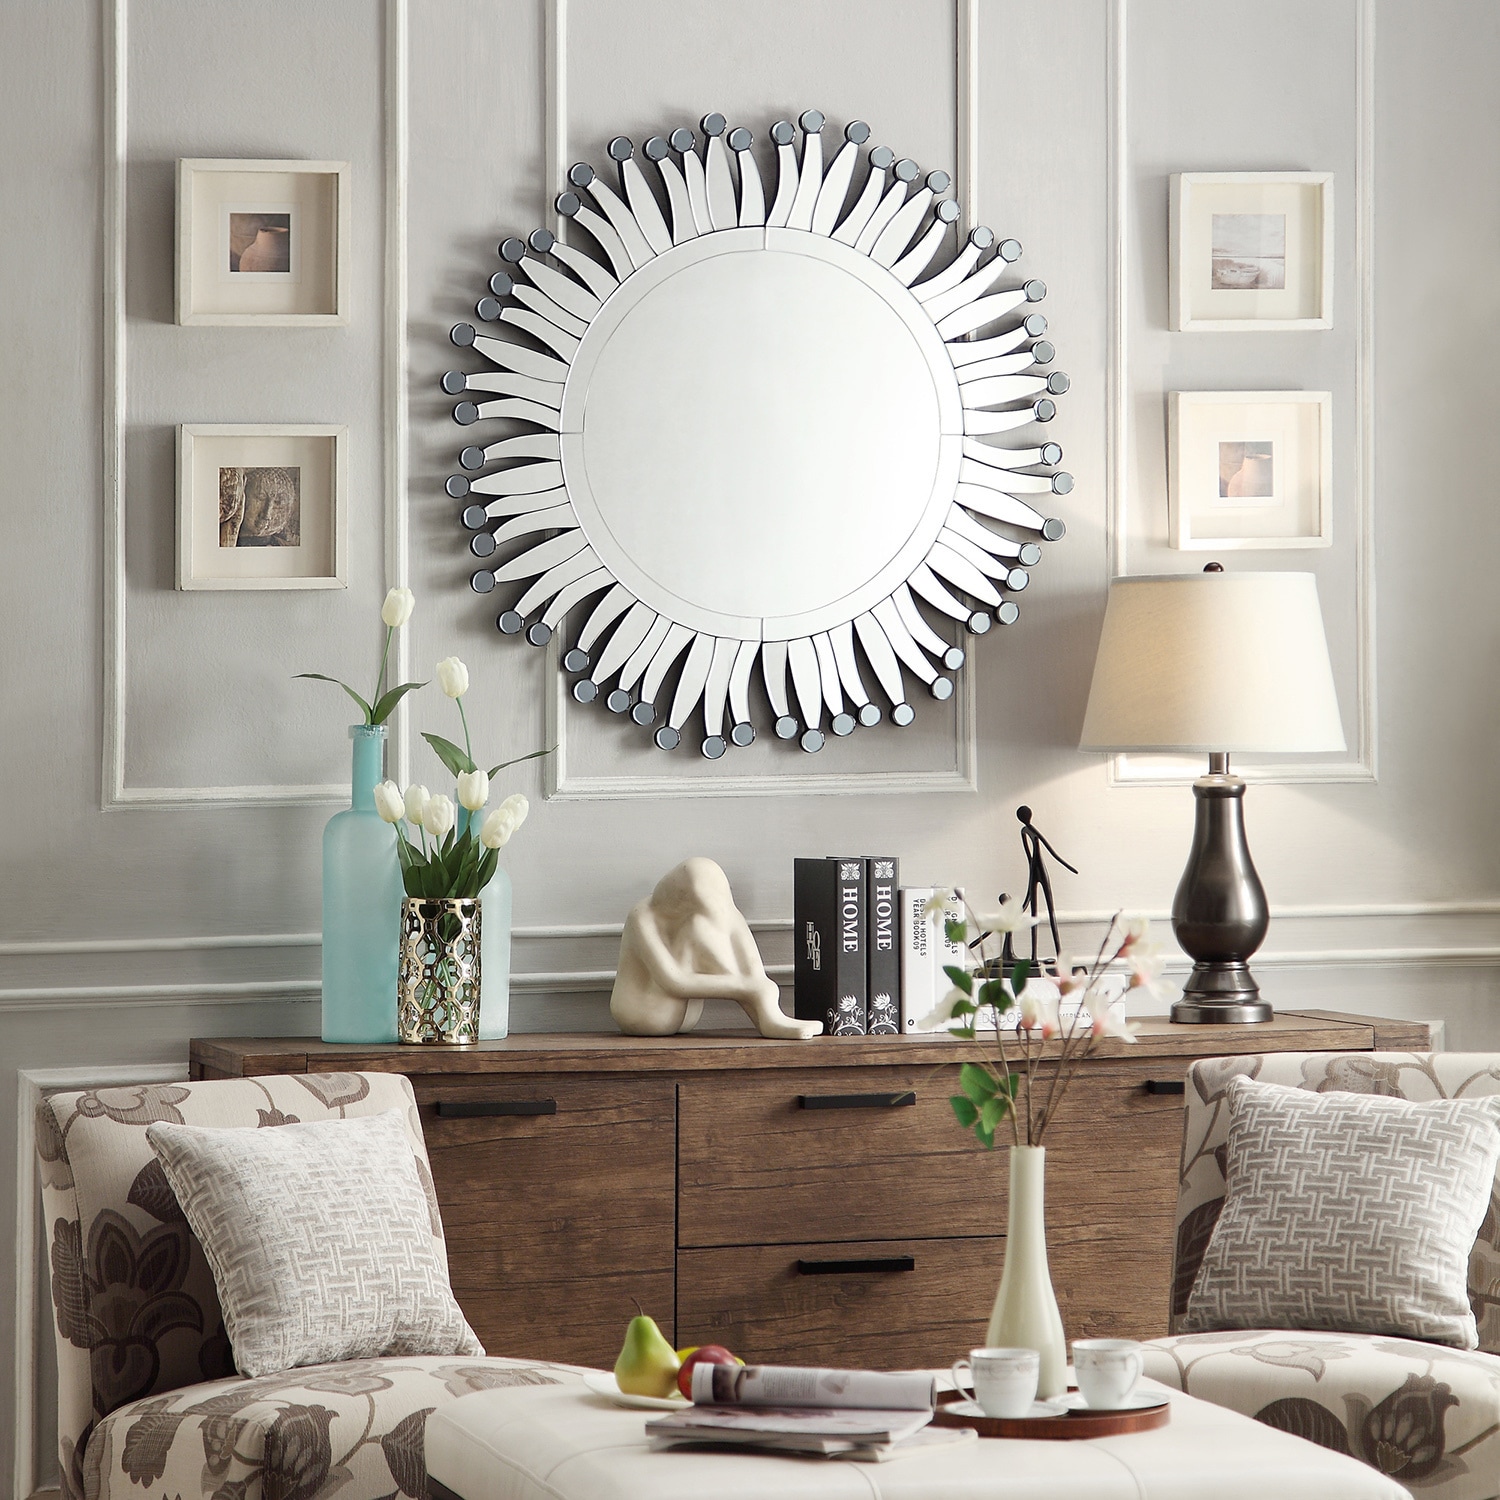 Inspire Q Roslyn Dotted Rays Silver Finish Accent Wall Mirror